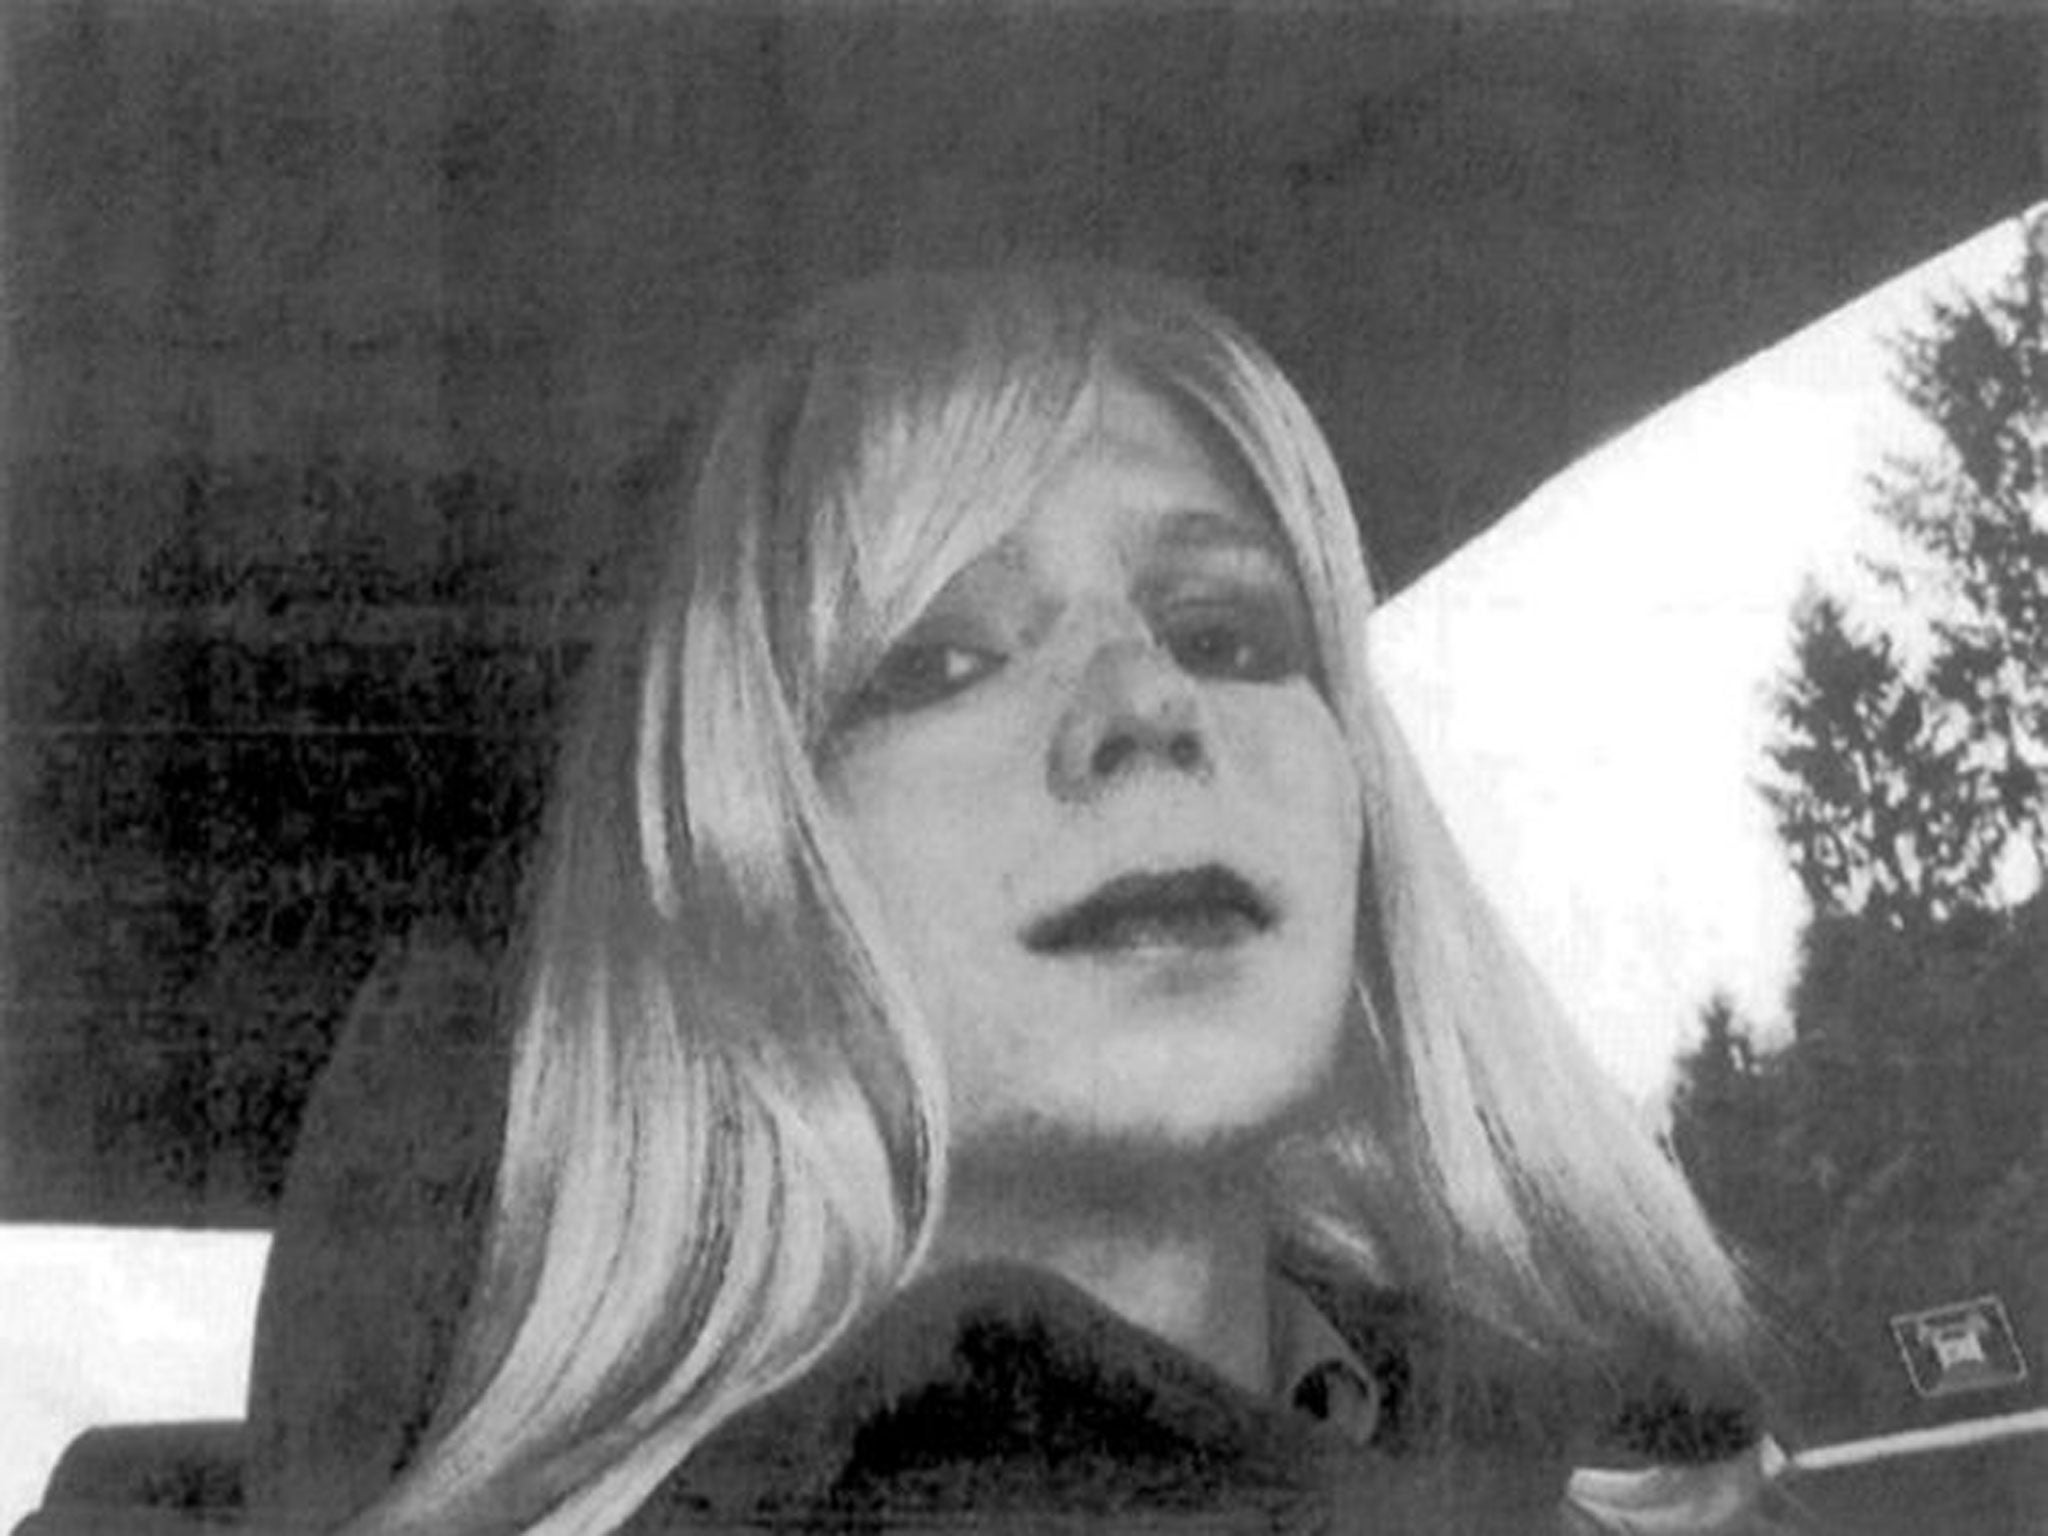 Chelsea Manning is currently serving a 35 year sentence in prison